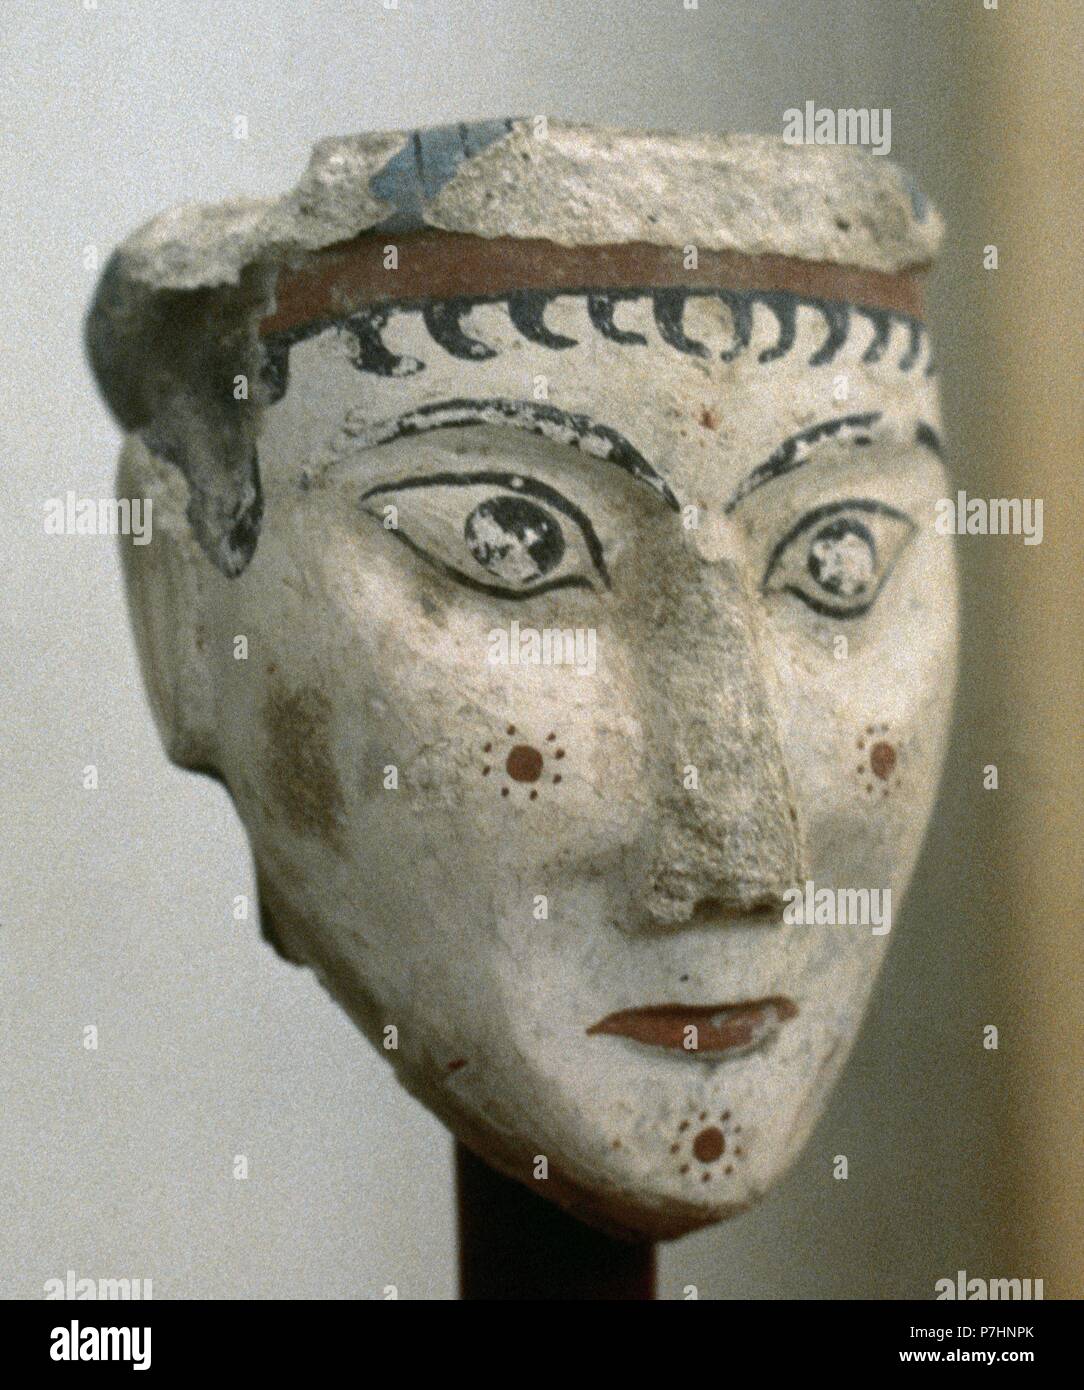 Plaster head of a woman (possibly a goddes or sphinx). Acropolis at Mycenae, 13th century BC. Greece. National Archaeological Museum. Athens, Greece. Stock Photo